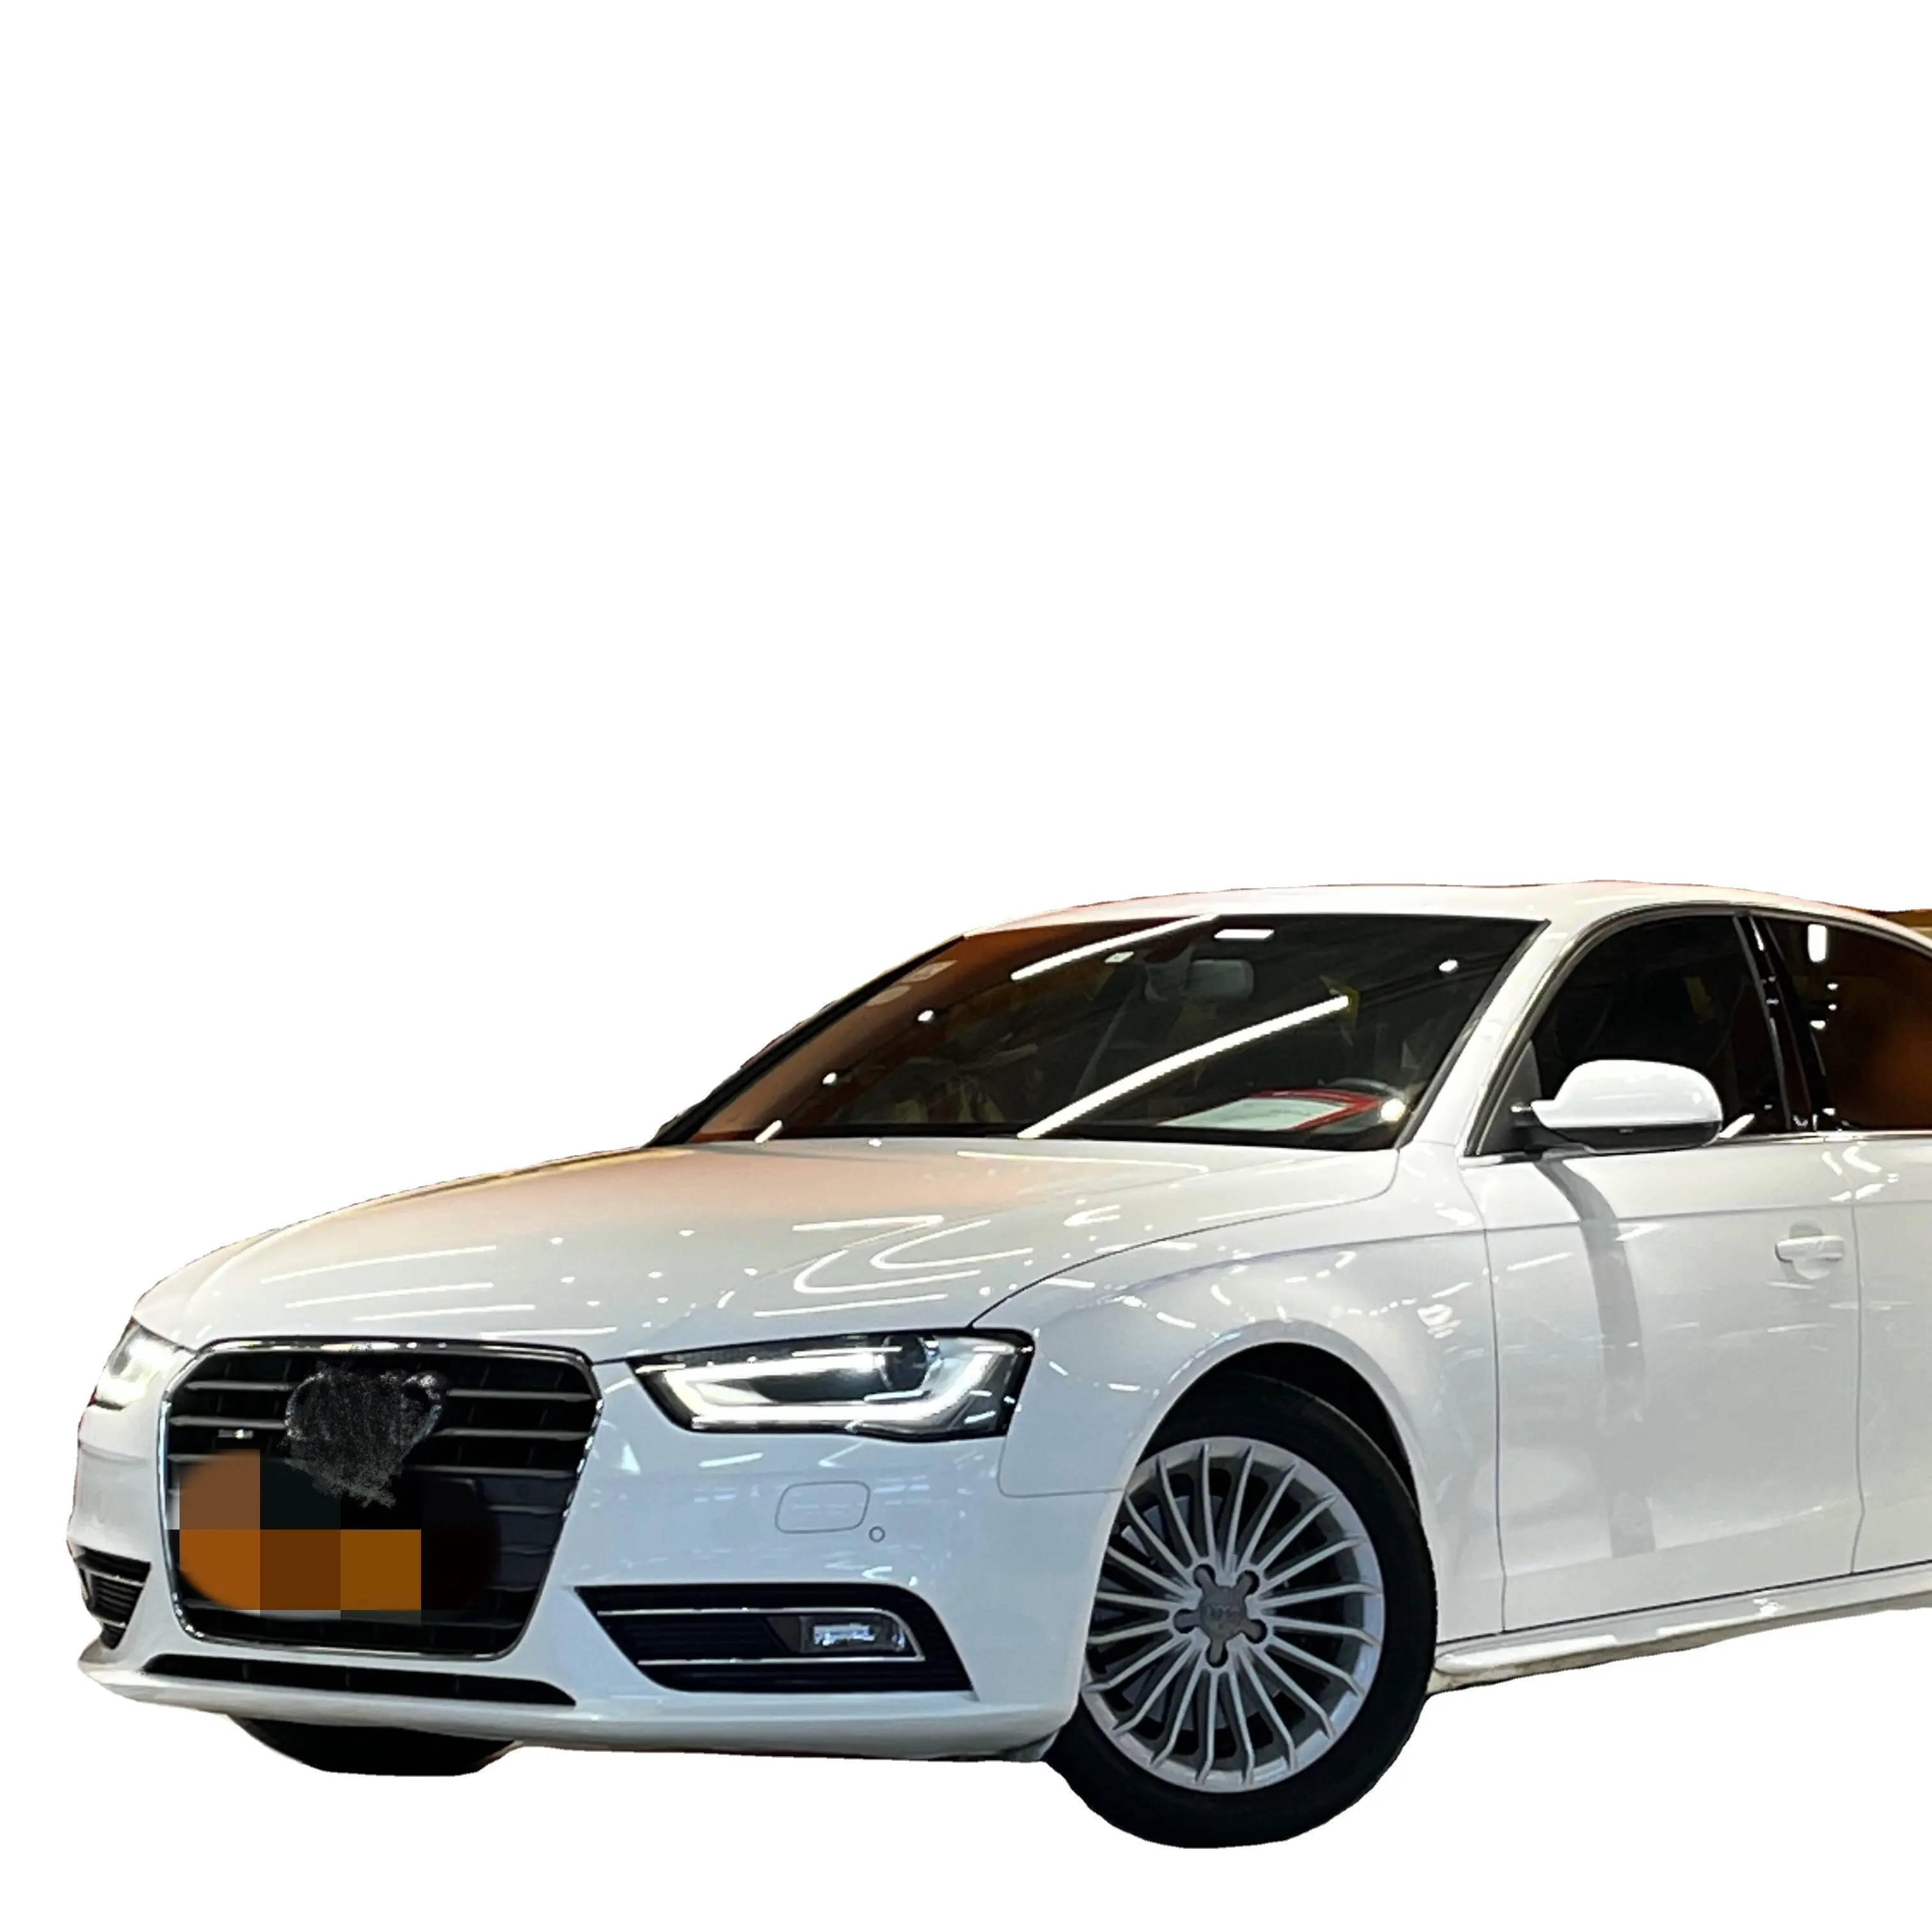 Buy Professional Chinese Manufacturer Used Price Car for Audi A4l to China Trade